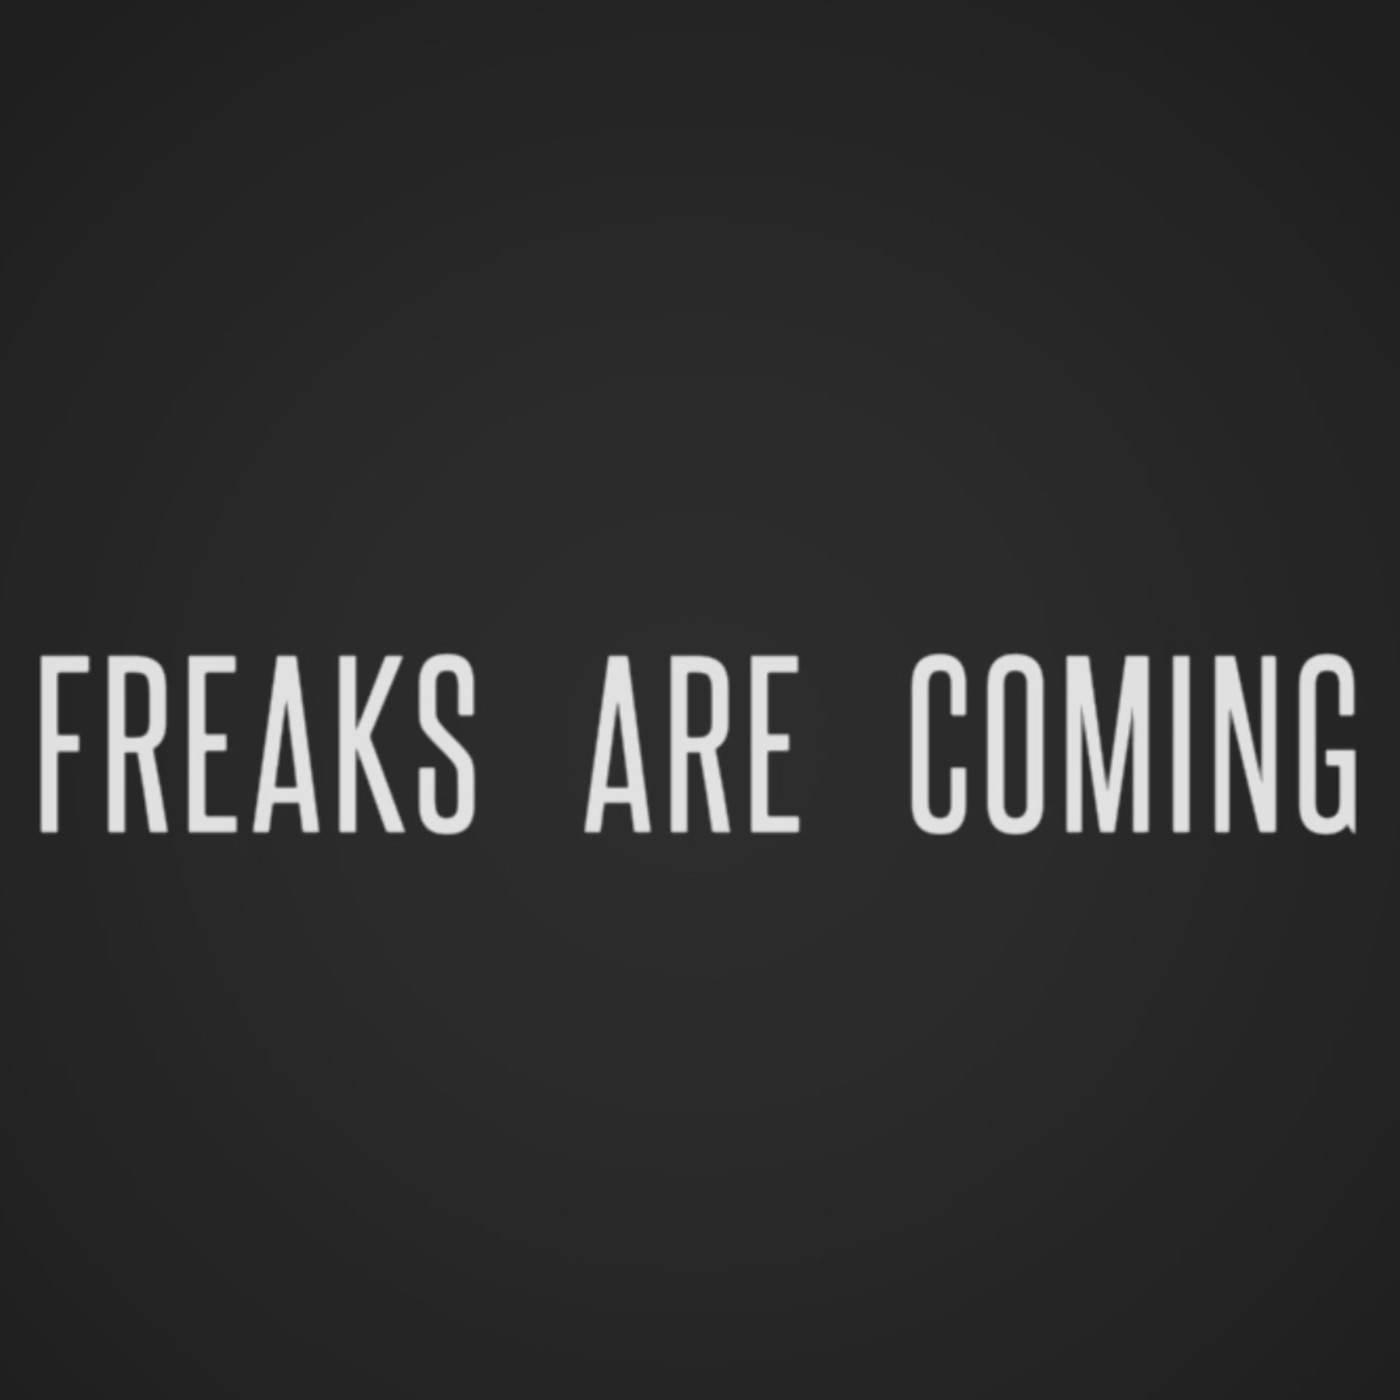 Freaks are coming - Podcast - Cosas varias